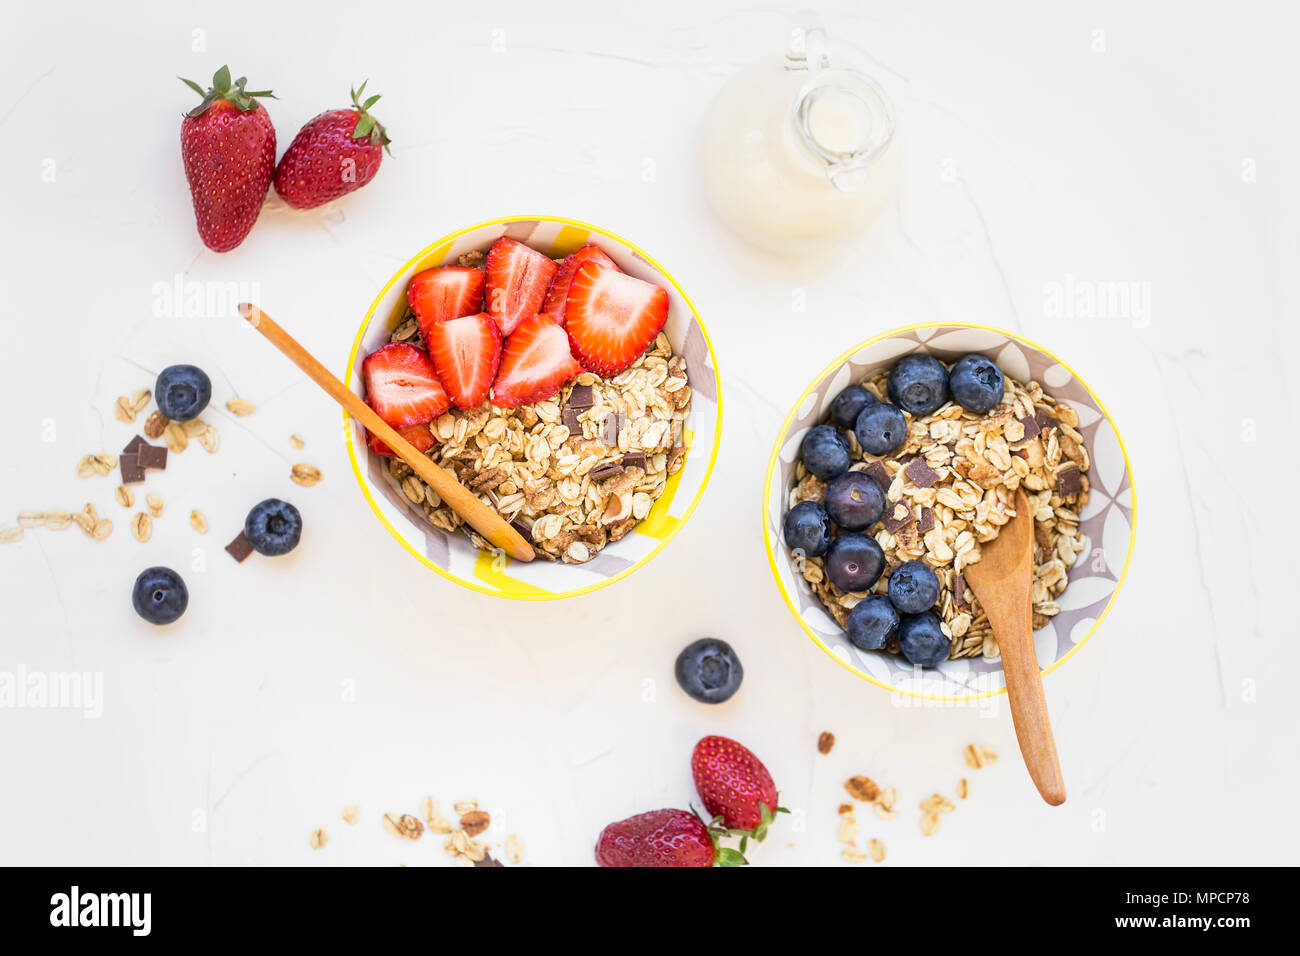 Muesli bowls with strawberries, blueberries fruits and milk , flatlay of healthy breakfast bowls Stock Photo